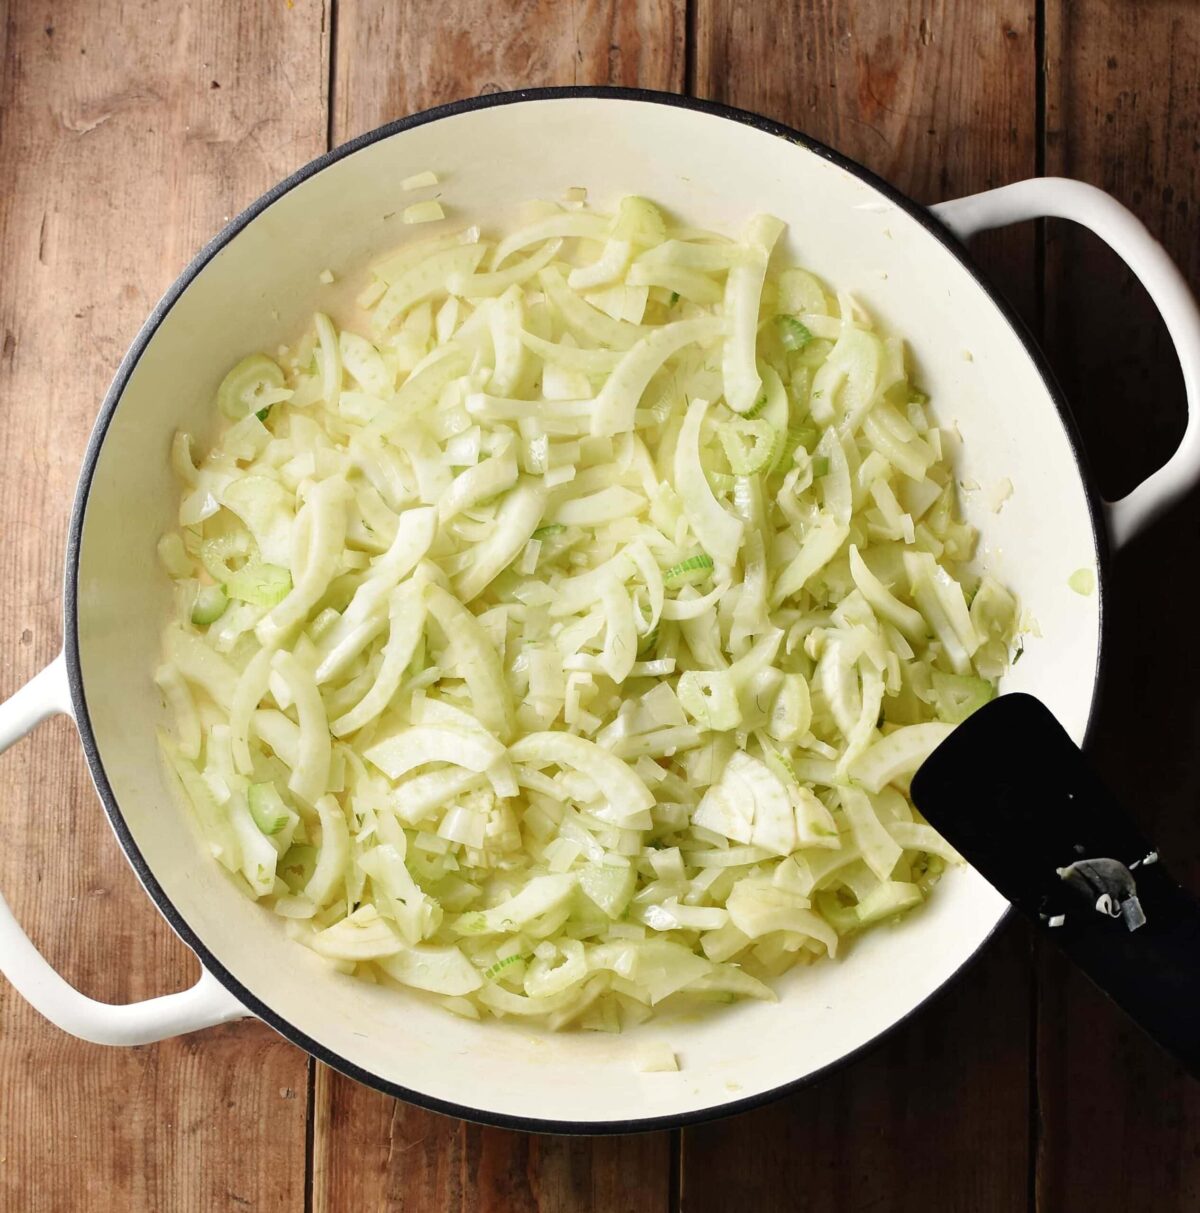 Sliced fennel and onions in large, white shallow dish with black spatula to the right.